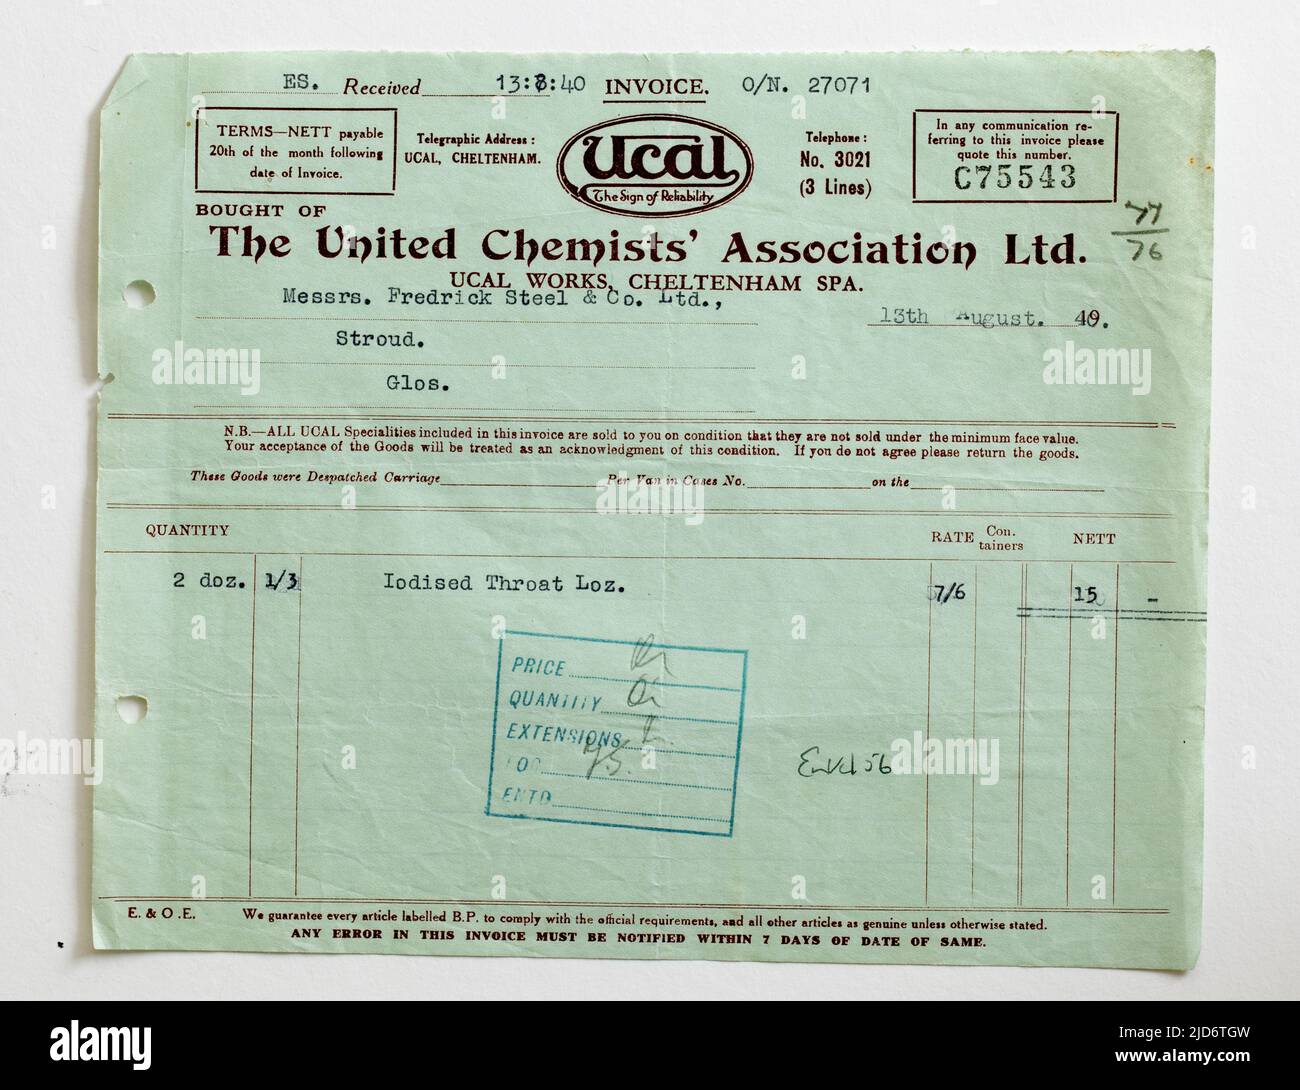 1940s Business Sales Invoice Receipt for Supplies from United Chemists Association Ltd Stock Photo